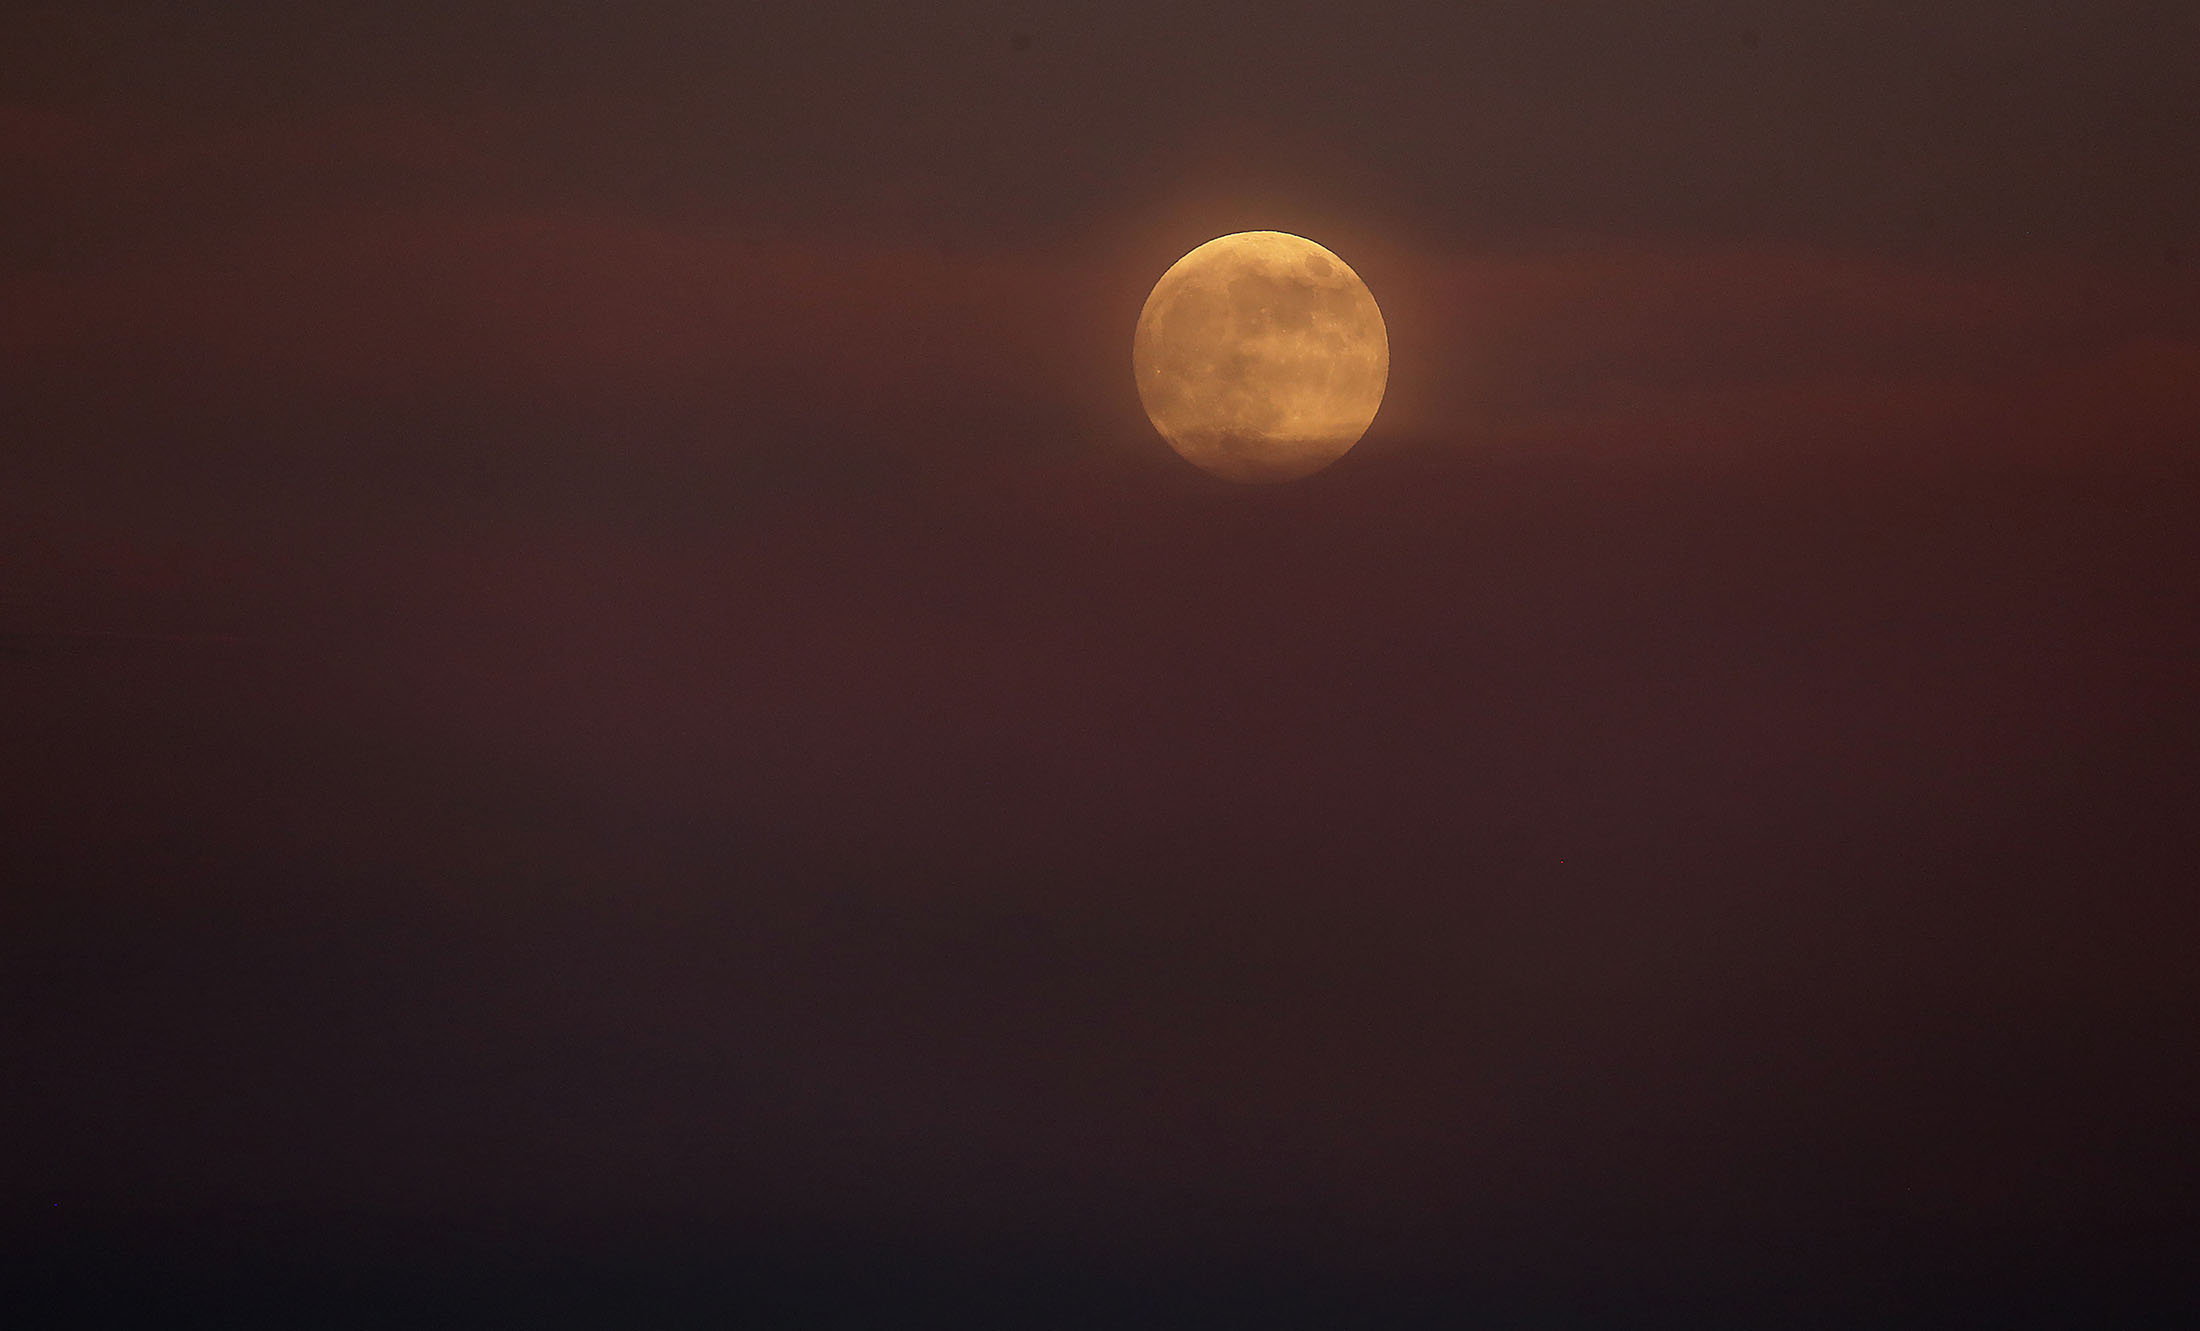  The full moon rises in the colorful smoke from the Cranston fire in the San Bernardino National Forest above Lake Hemet on Thursday, July 26, 2018. 